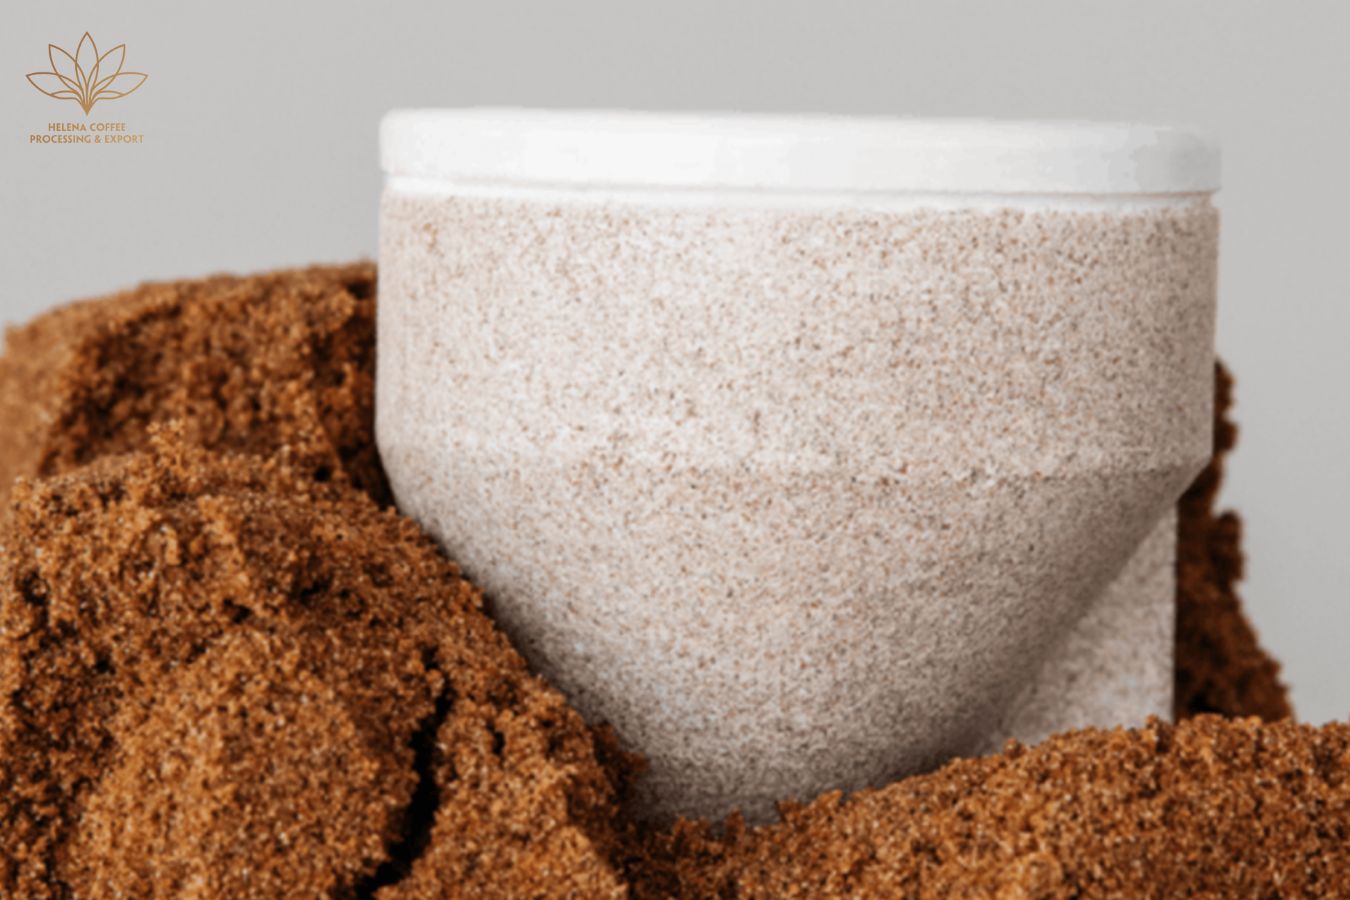 Coffee Cups Made From A Sand Material